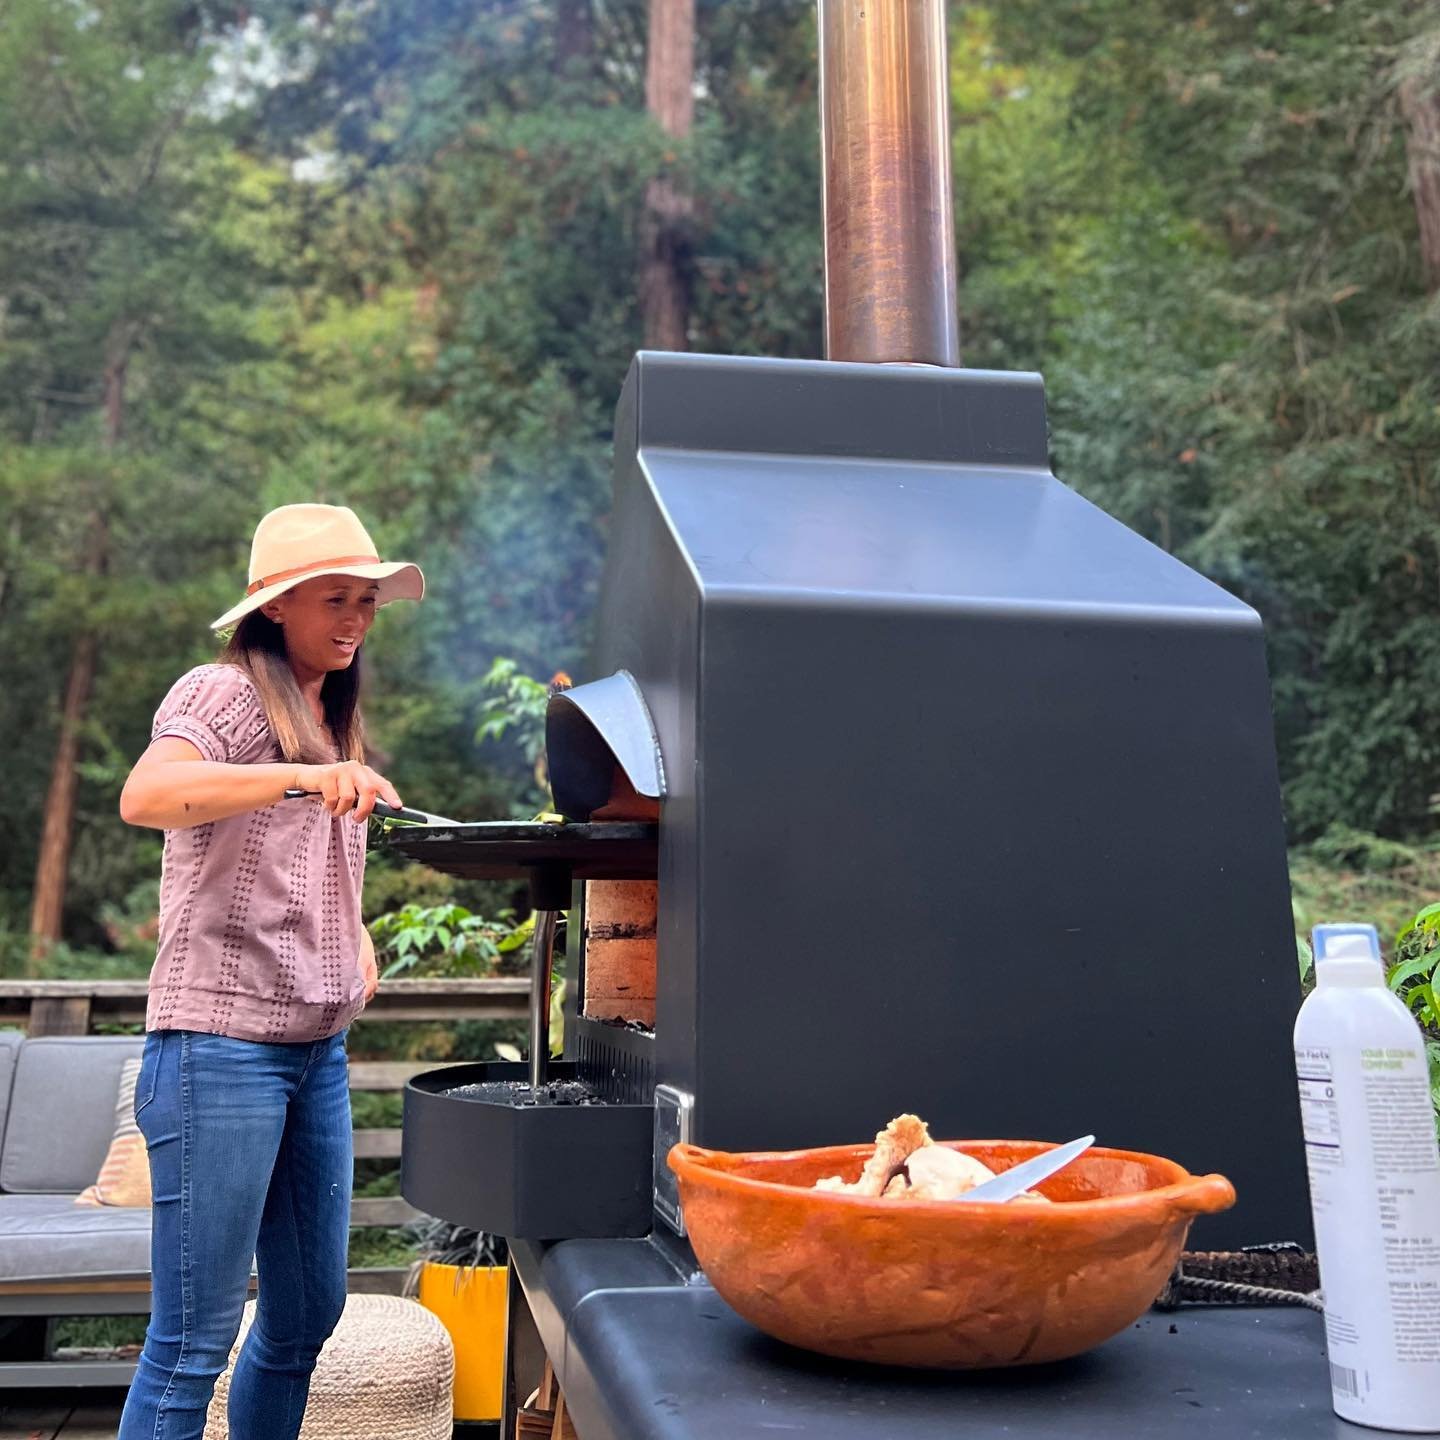 The days are getting longer and BBQ season is coming up! 

@bakewellburners have you covered for warmth and cooking in style 👩&zwj;🍳👨&zwj;🍳 

Stay tuned for our 2nd annual giveaway that will be announced this summer ☀️

#outdoorpizzaoven #woodfir